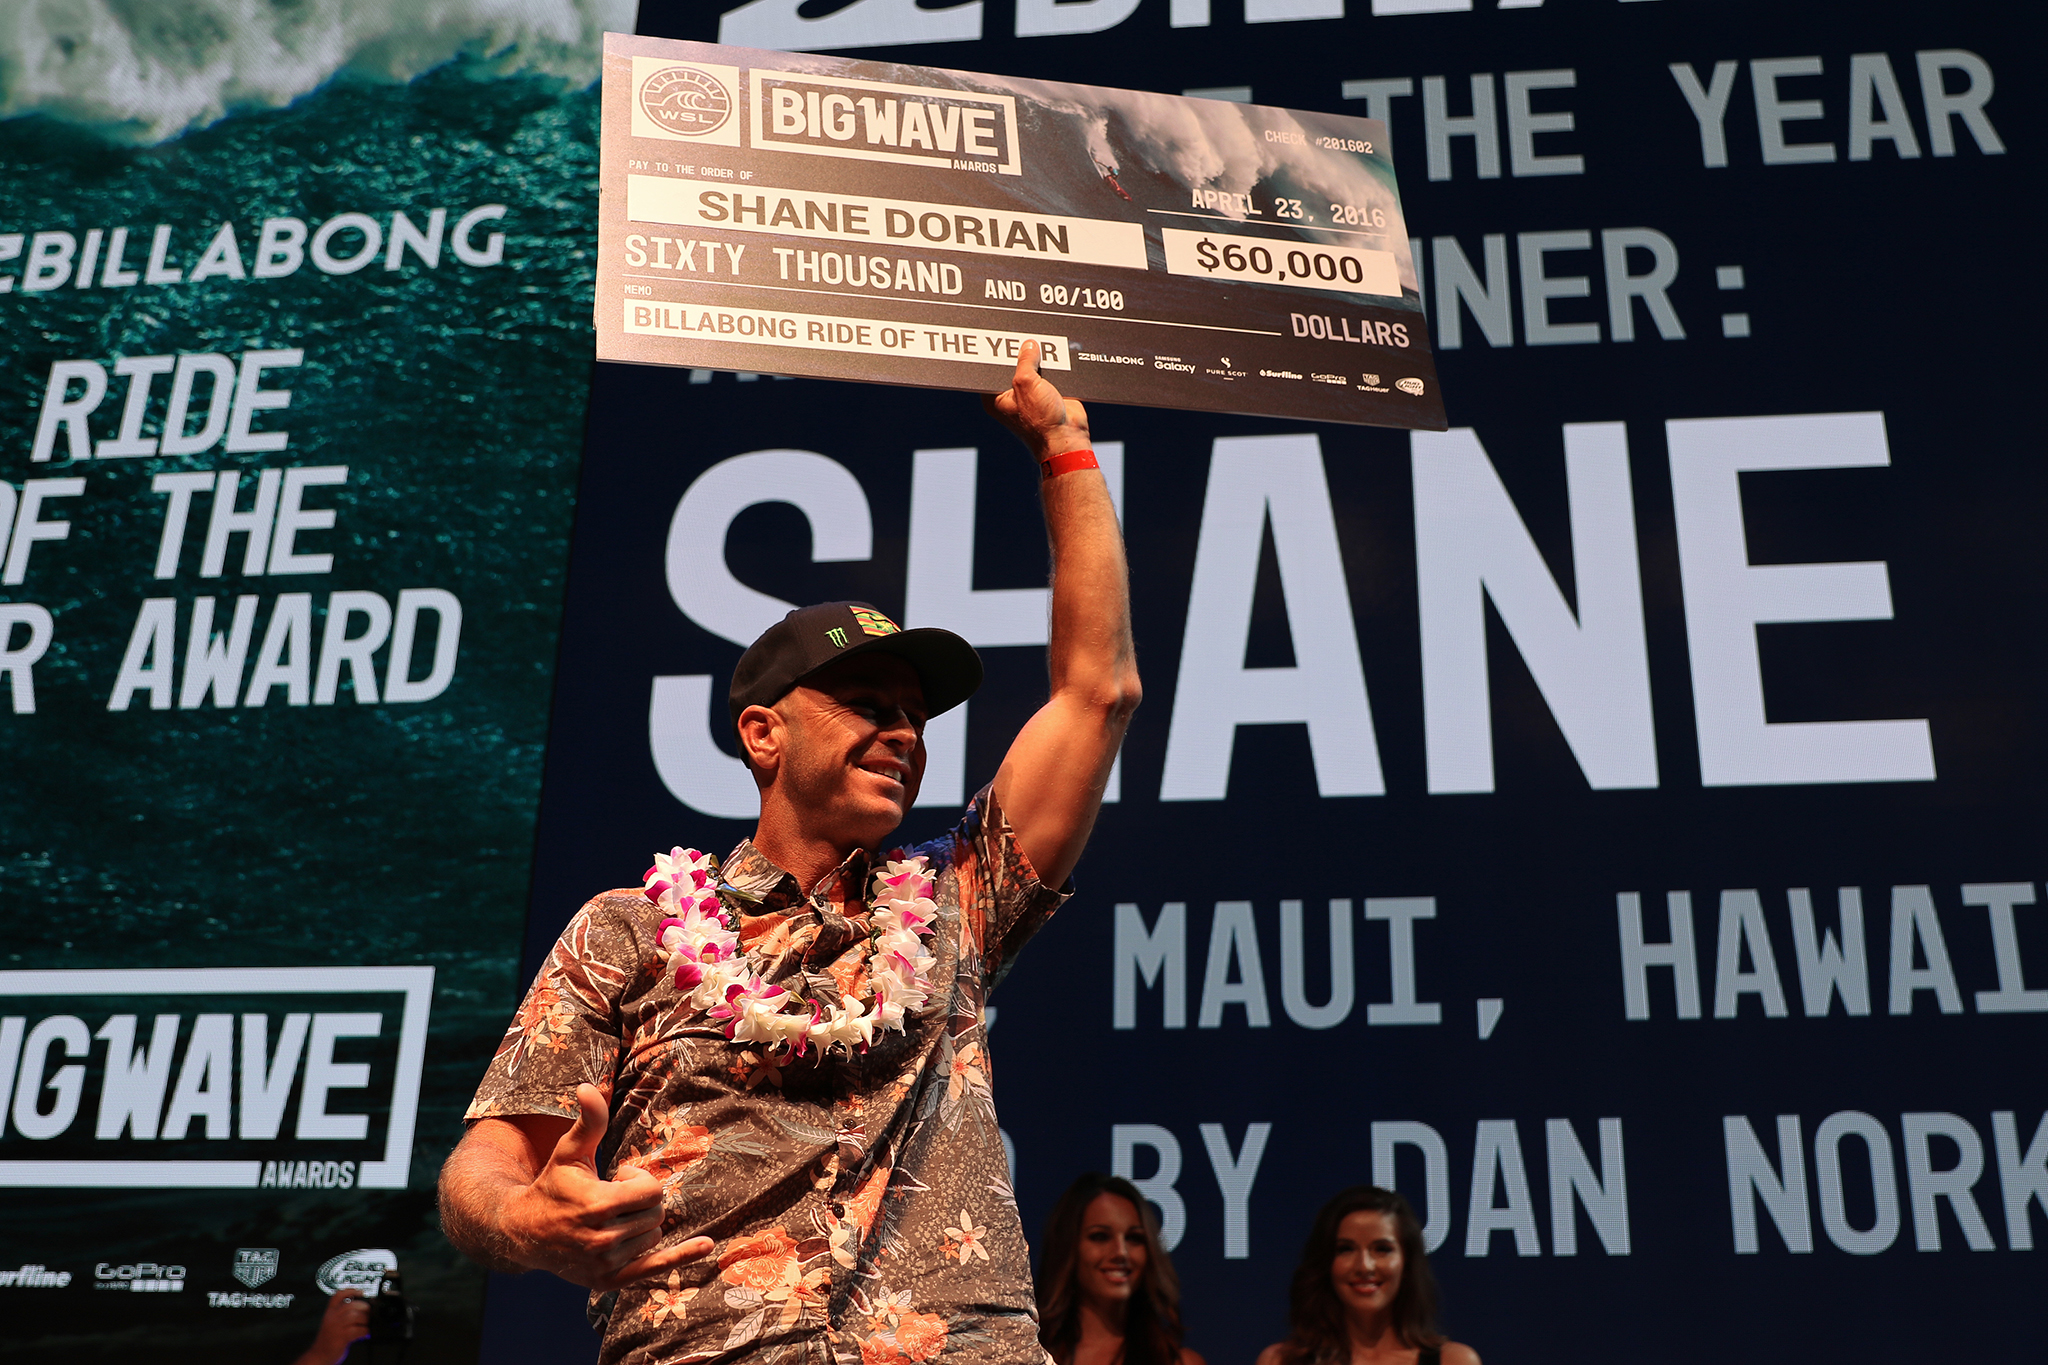 Shane Dorian secured the Billabong Ride of the Year Award for an incredible ride at Jaws earlier this year. He also won the Surfline Men’s Overall Performance of the Year Award at the XXL Awards in Anaheim, California. Photo: WSL